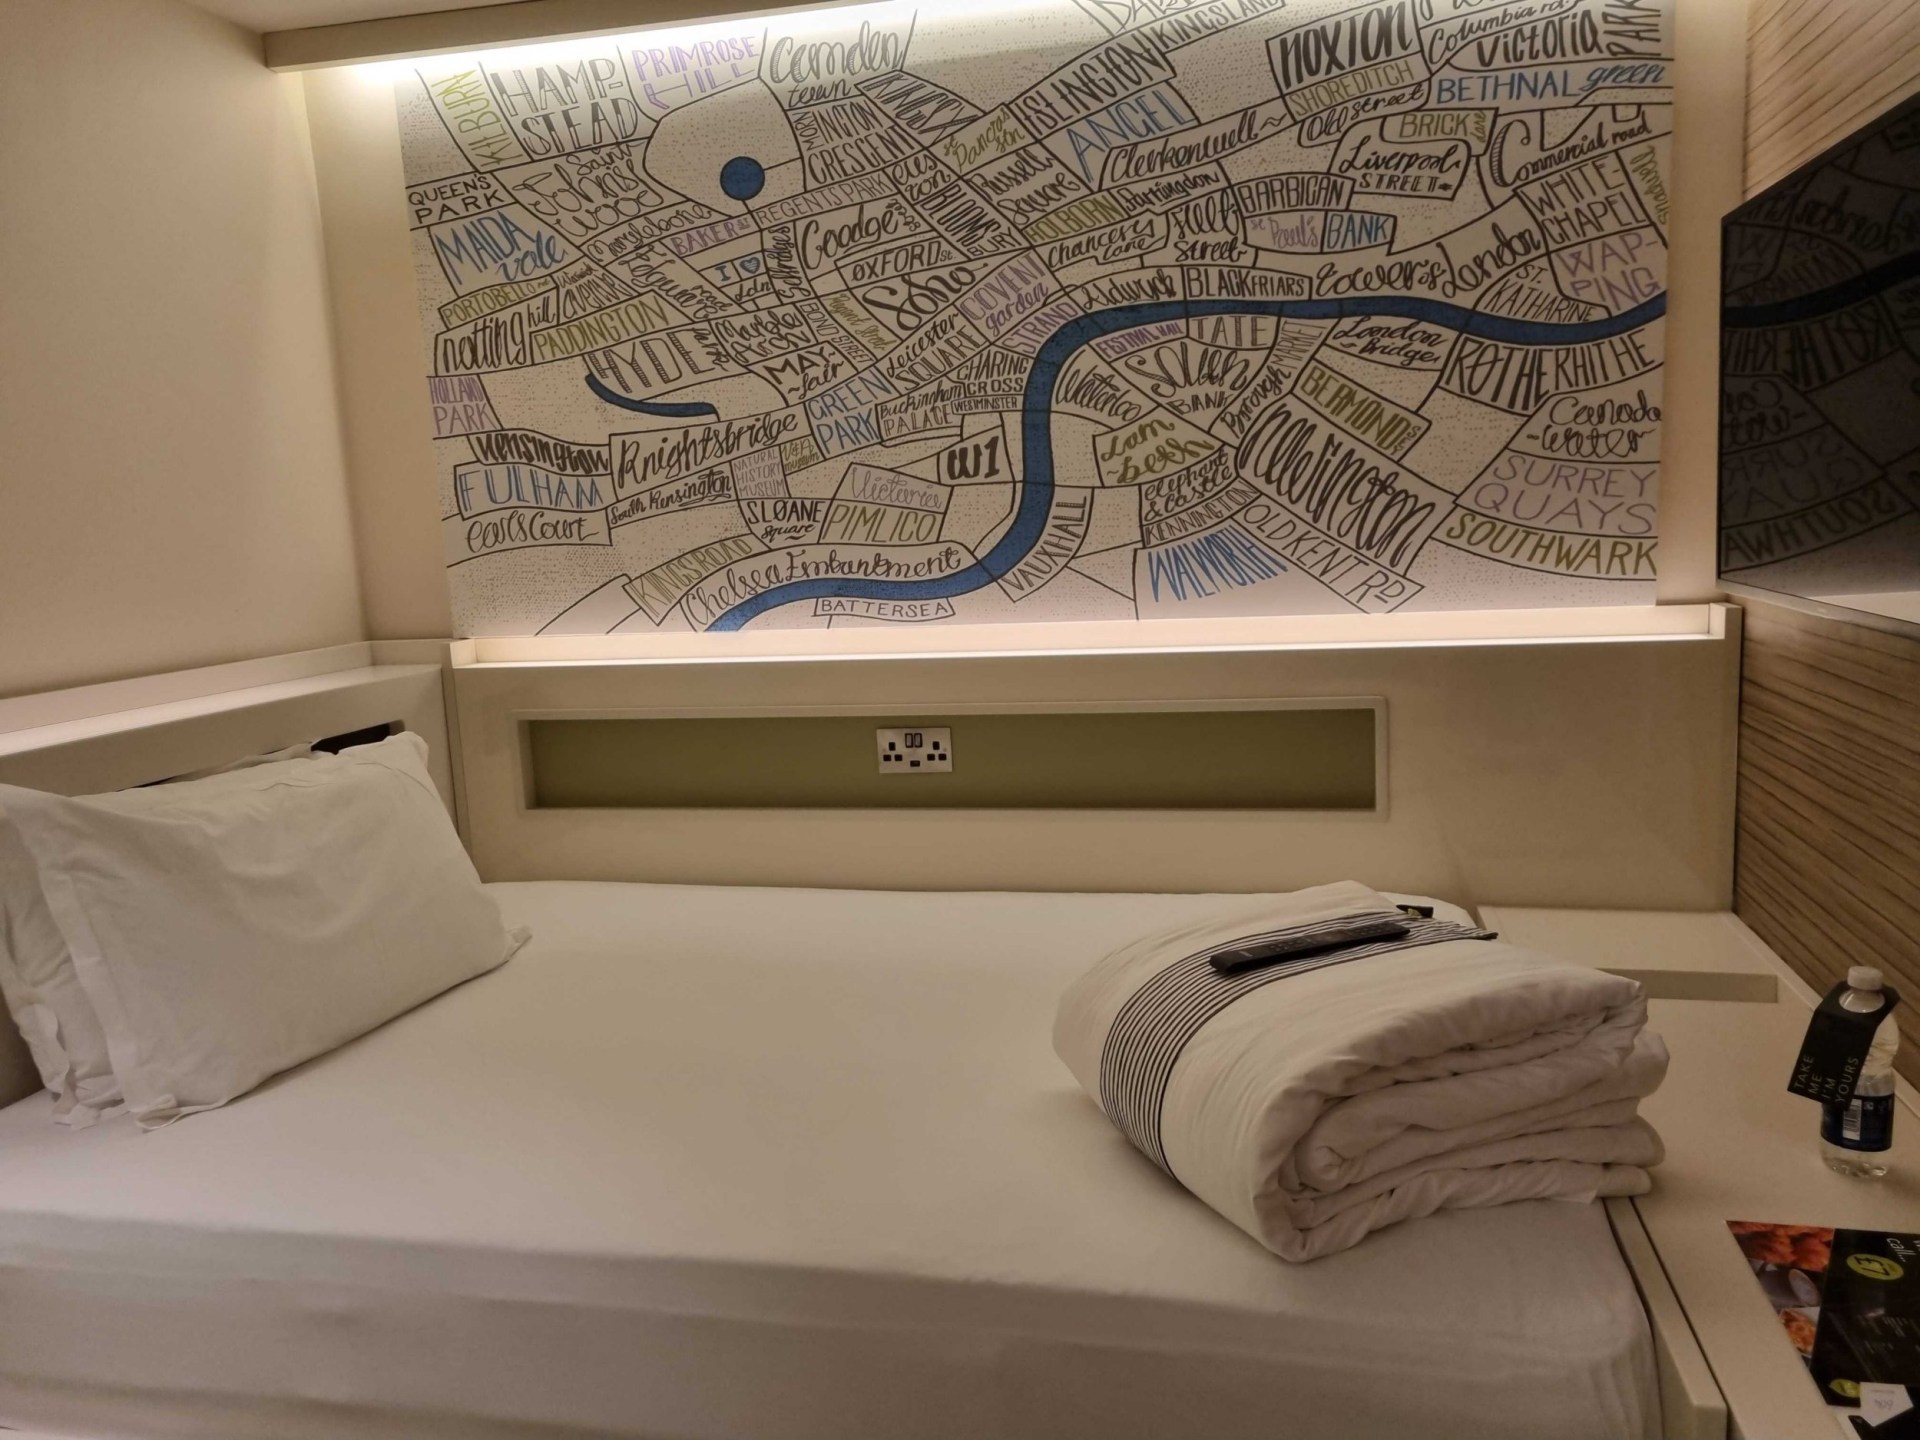 i stayed in london's award-winning £42 per night hotel that's cheaper than my commute